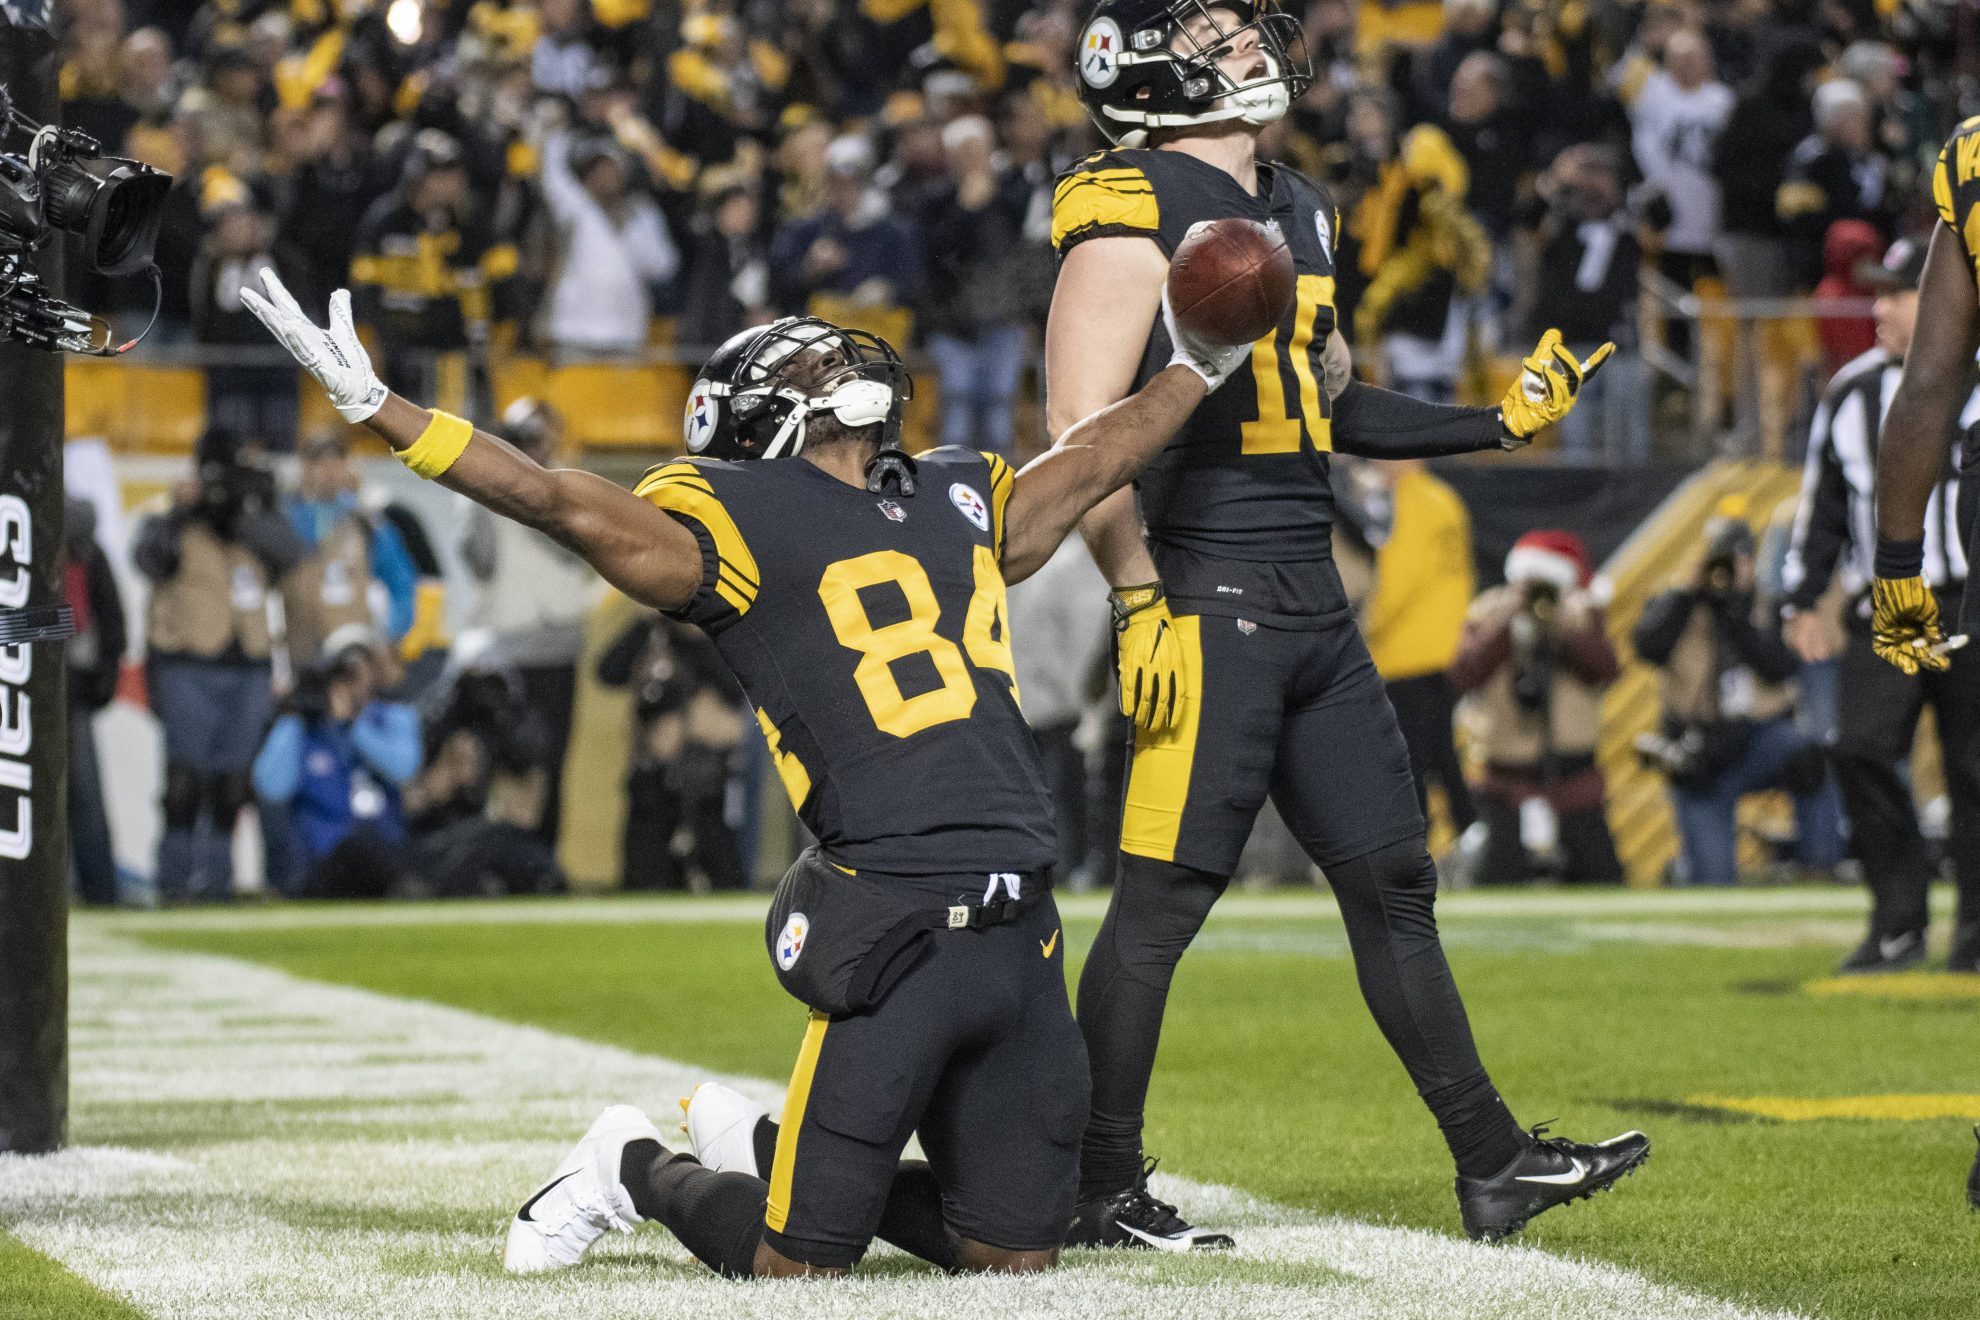 PITTSBURGH, PA - DECEMBER 16: Pittsburgh Steelers wide receiver Antonio Brown (84) celebrates with teammate wide receiver Ryan Switzer after scoring a touchdown during the game between the Pittsburgh Steelers and the New England Patriots at Heinz Field in Pittsburgh, PA on December 16, 2018. (Photo by Shelley Lipton/Icon Sportswire) NFL American Football Herren USA DEC 16 Patriots at Steelers PUBLICATIONxINxGERxSUIxAUTxHUNxRUSxSWExNORxDENxONLY Icon181216813